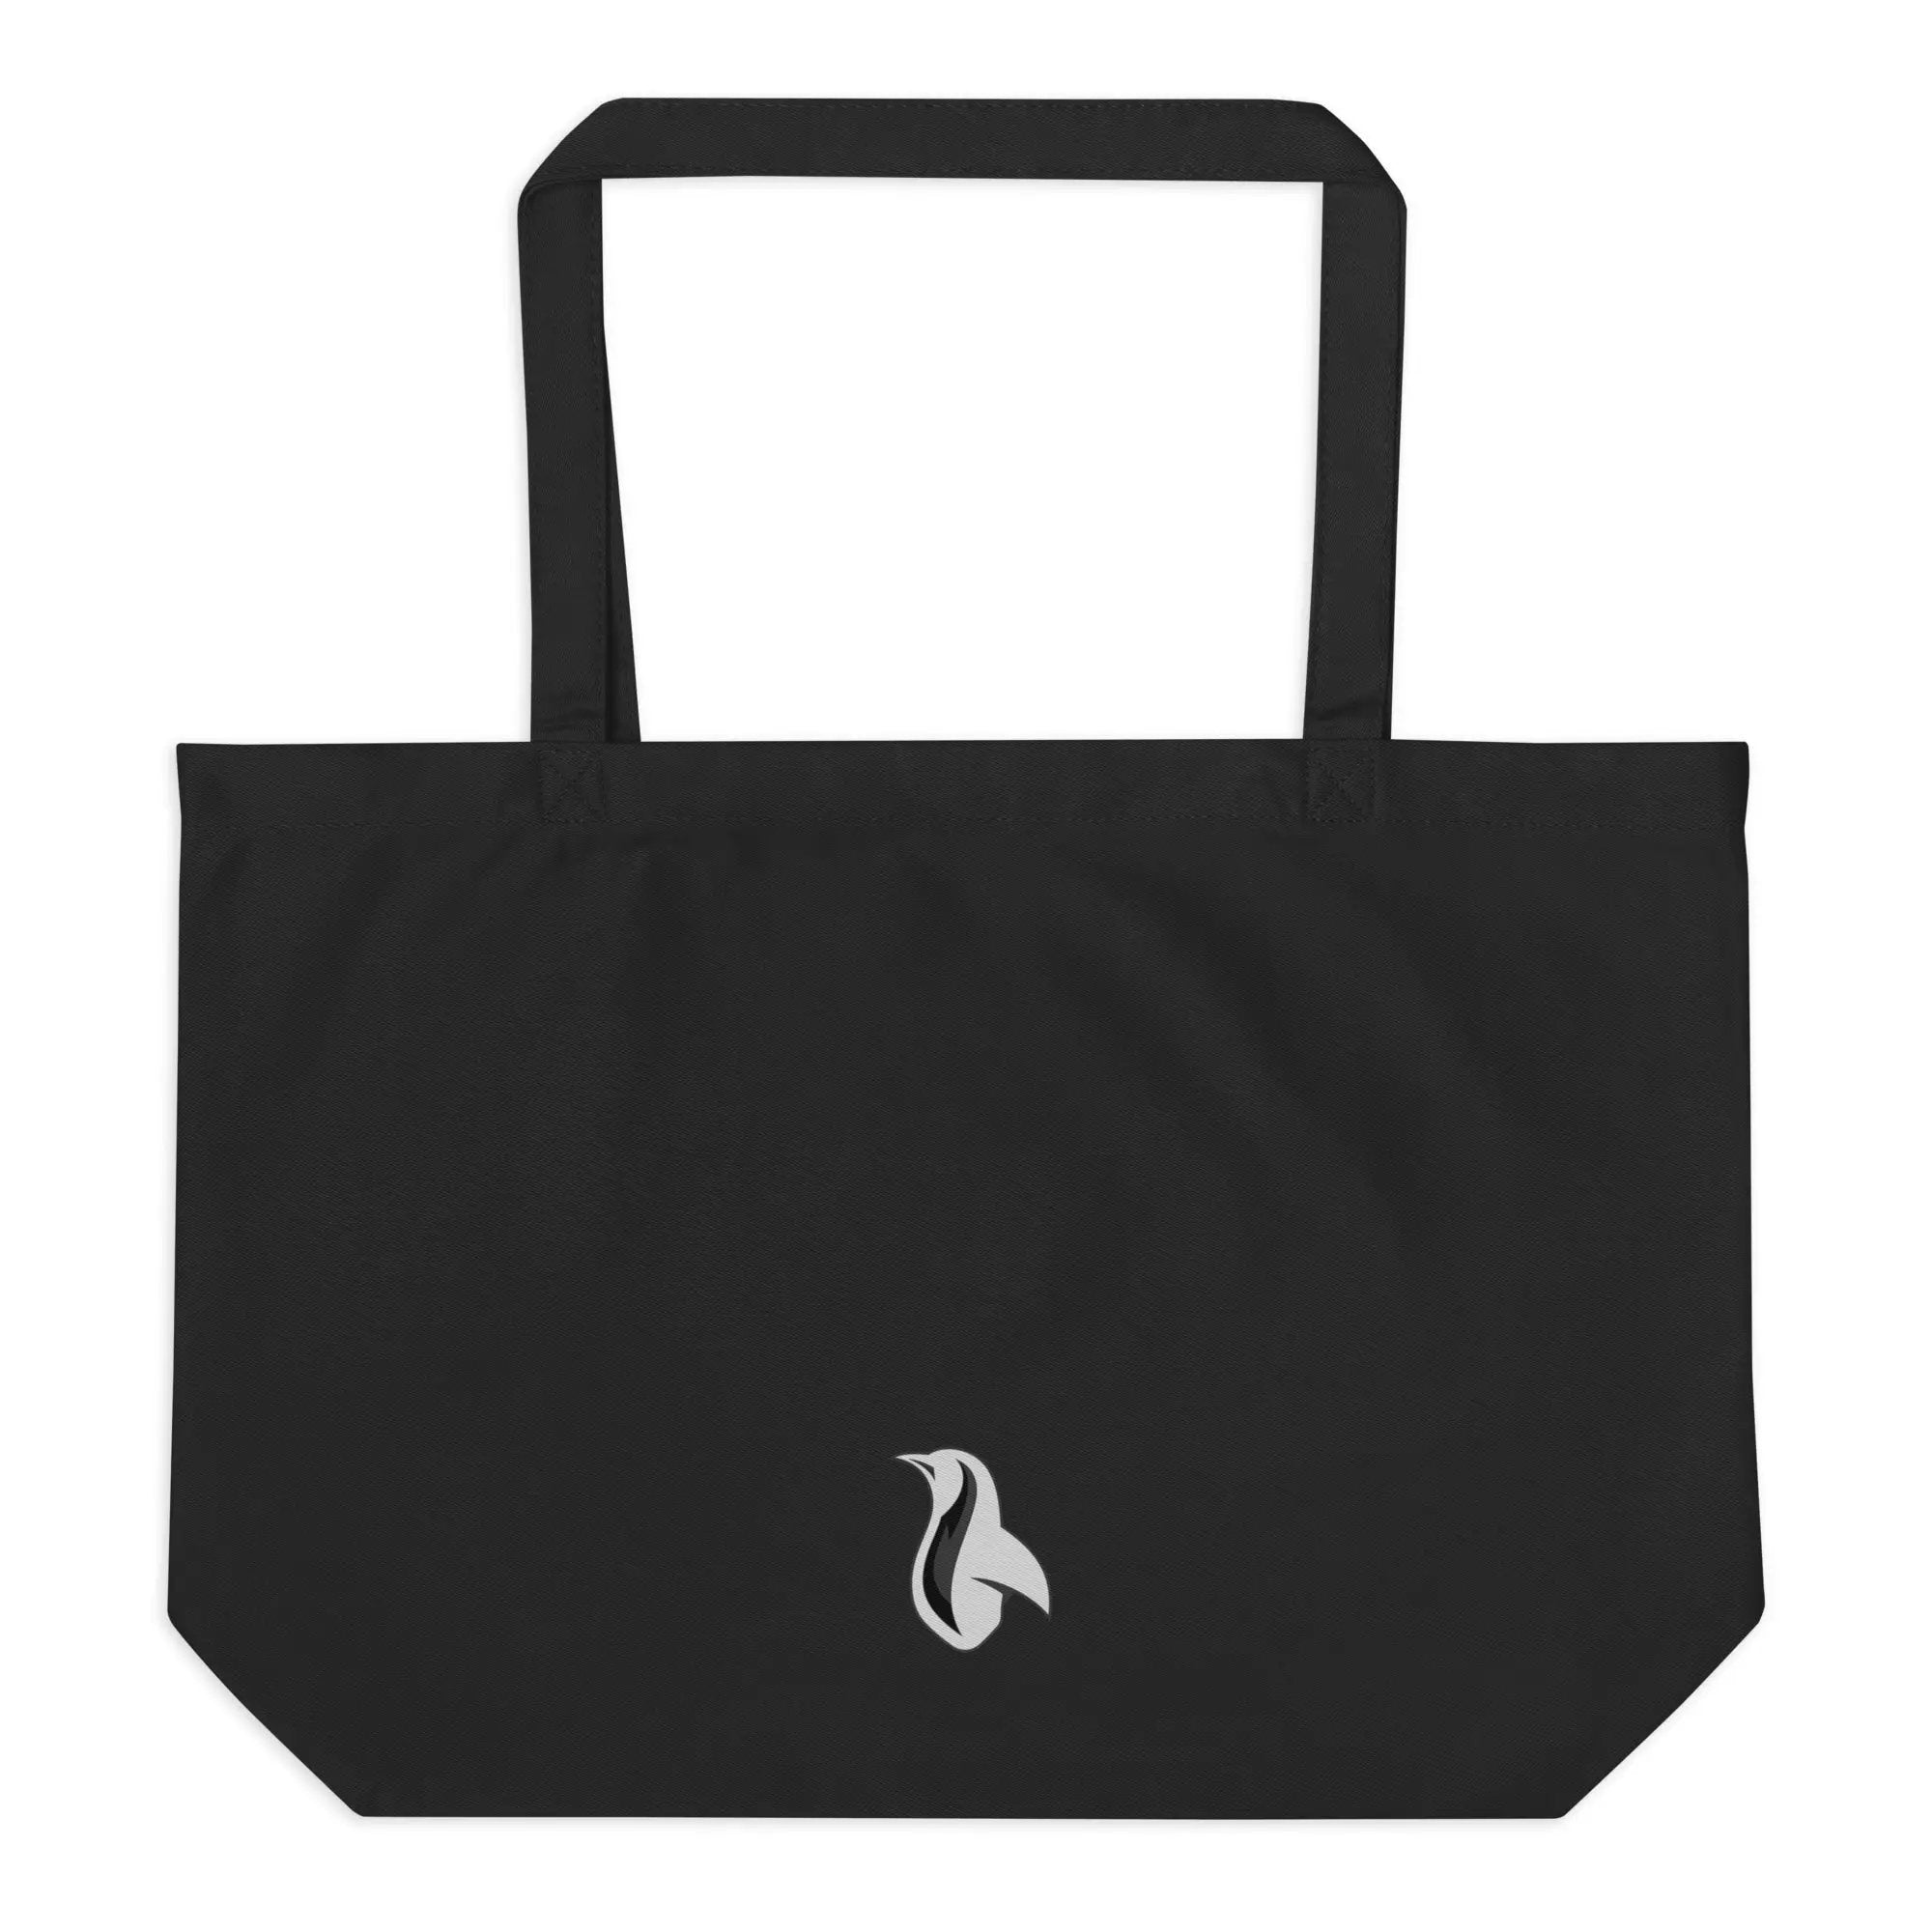 Let's All Go To The Lobby Large organic tote bag